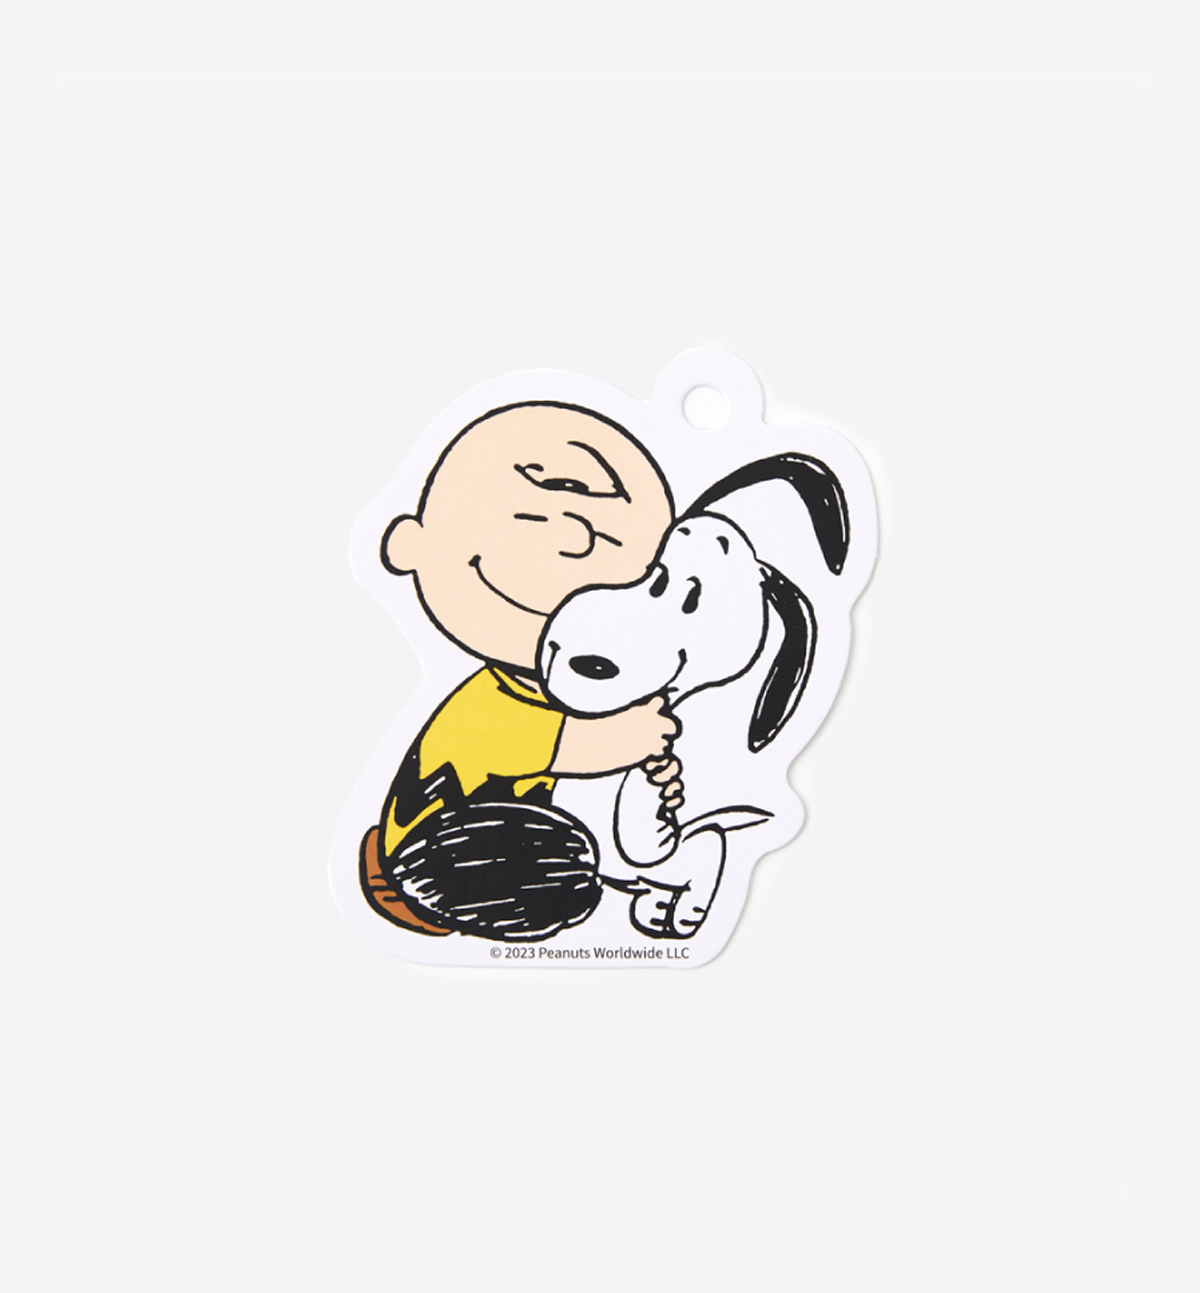 Peanuts Face Cushion [Lucy]